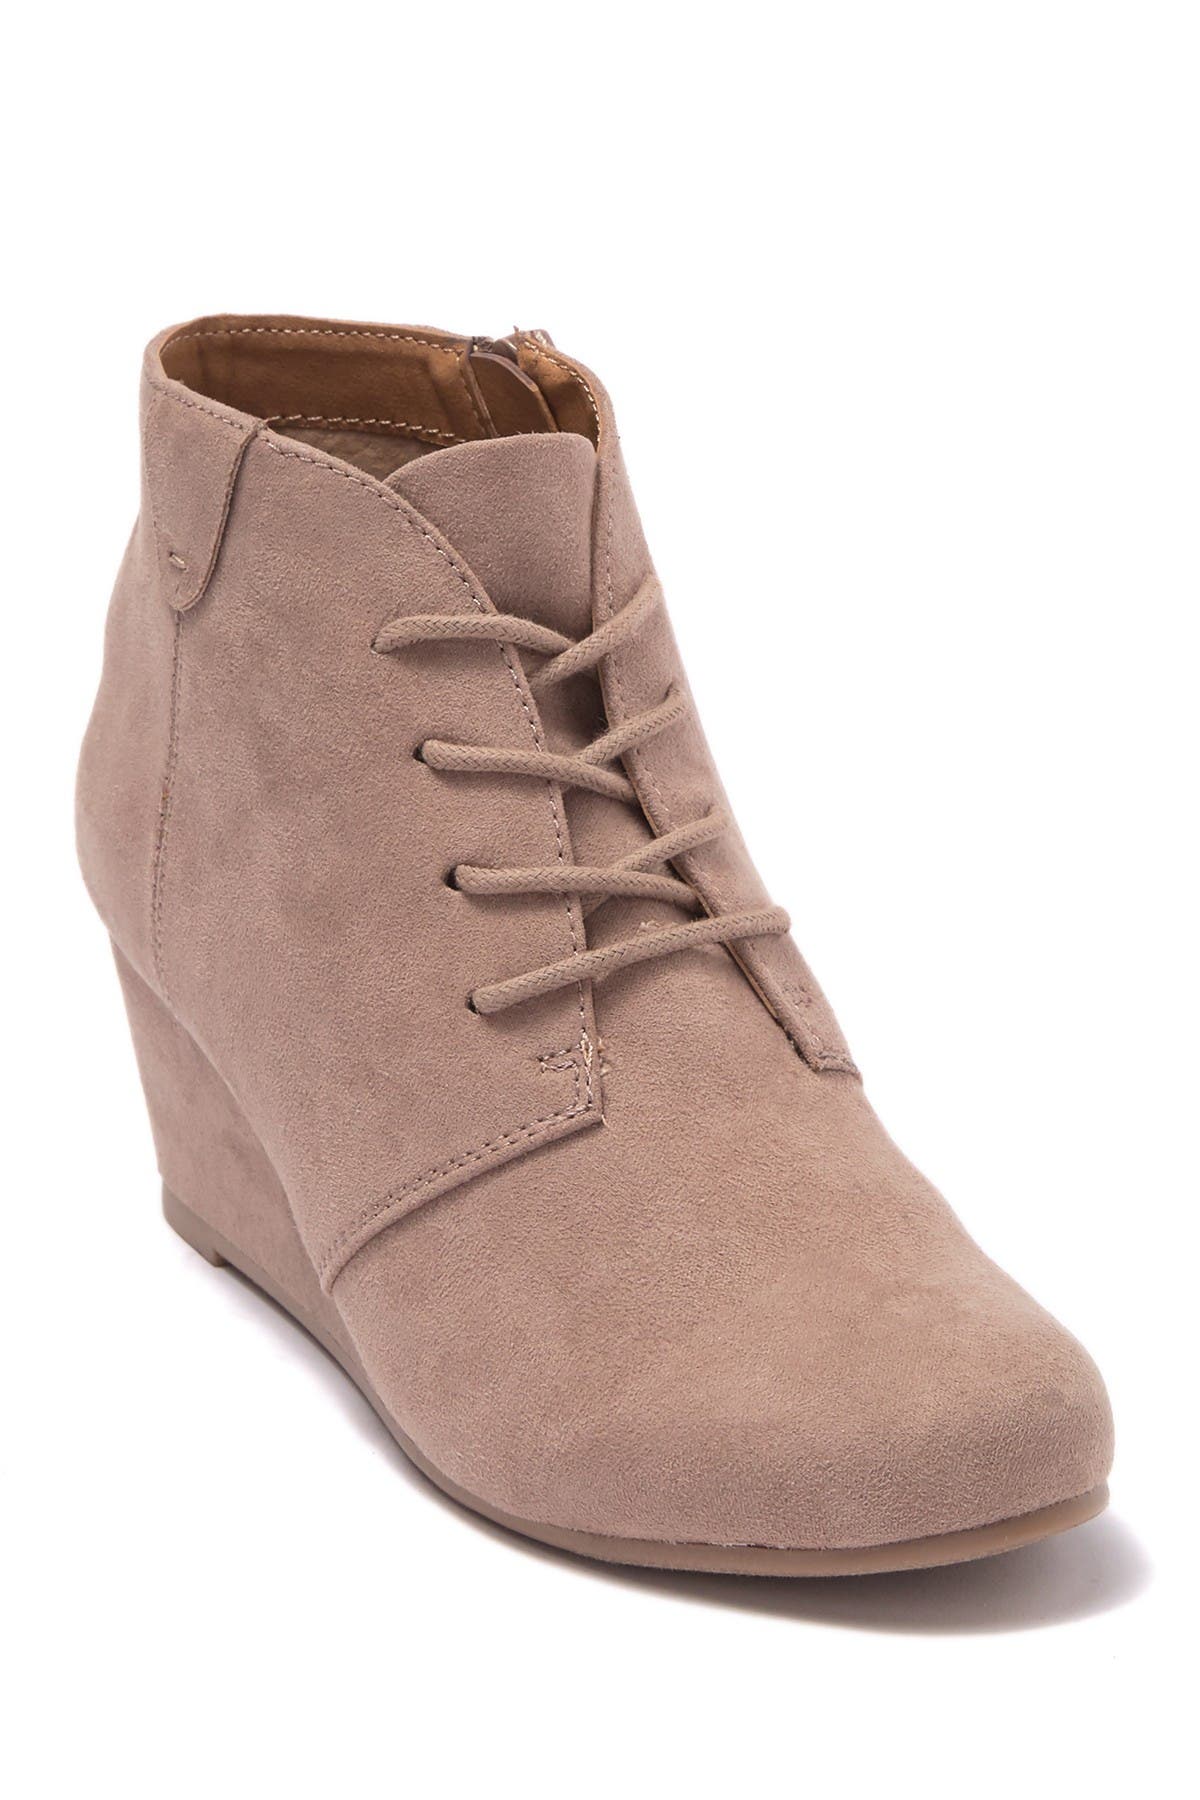 dv8 shoes booties